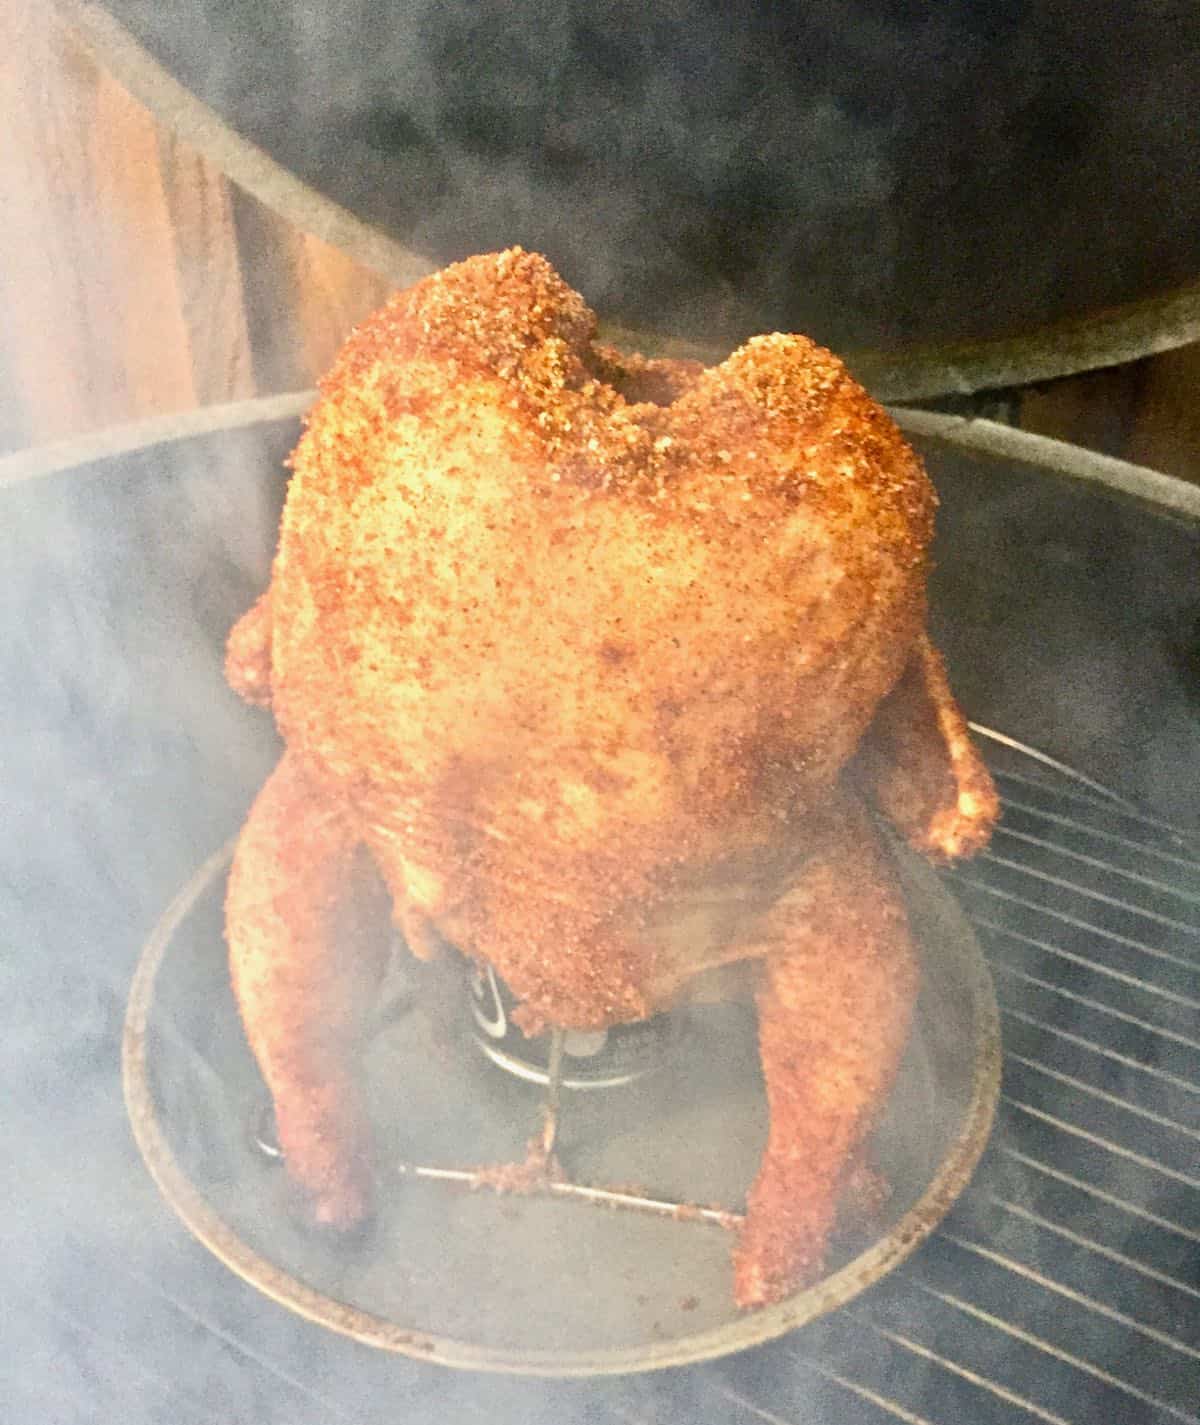 Poultry sitting upright on a grill with smoke rising.